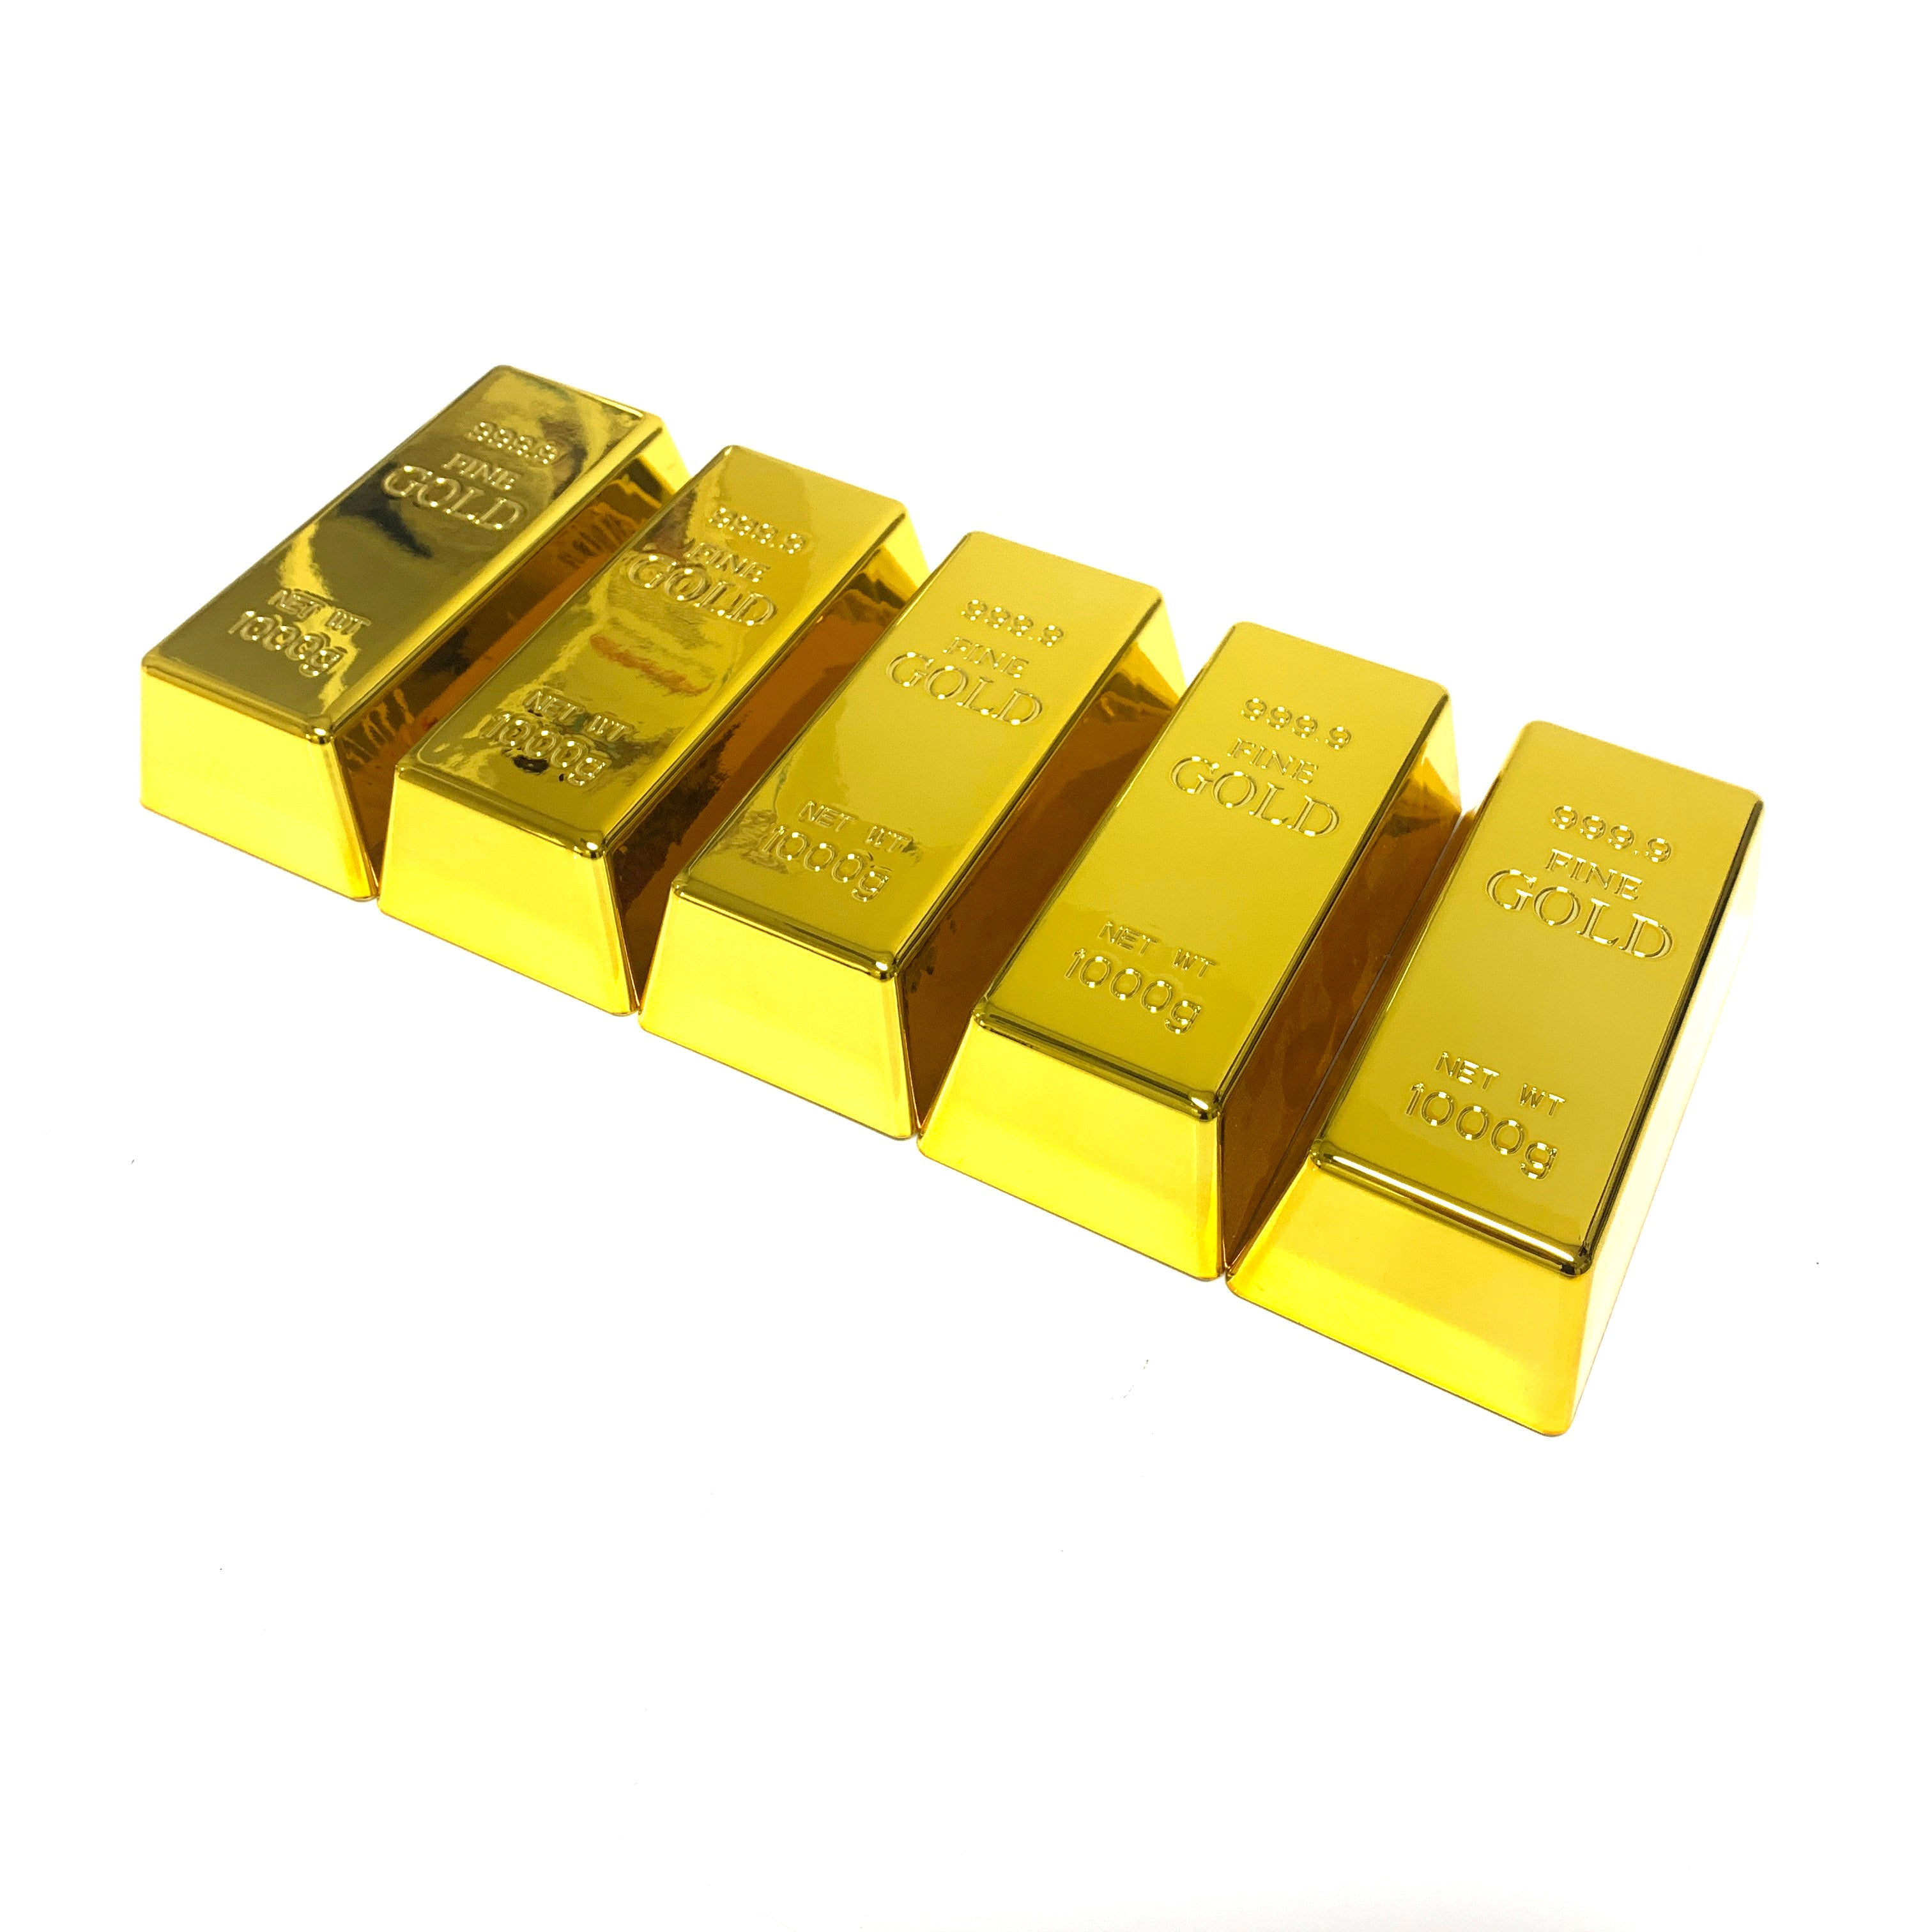 Large Gold Bar Plastic Replica - Weighted Filled Prop